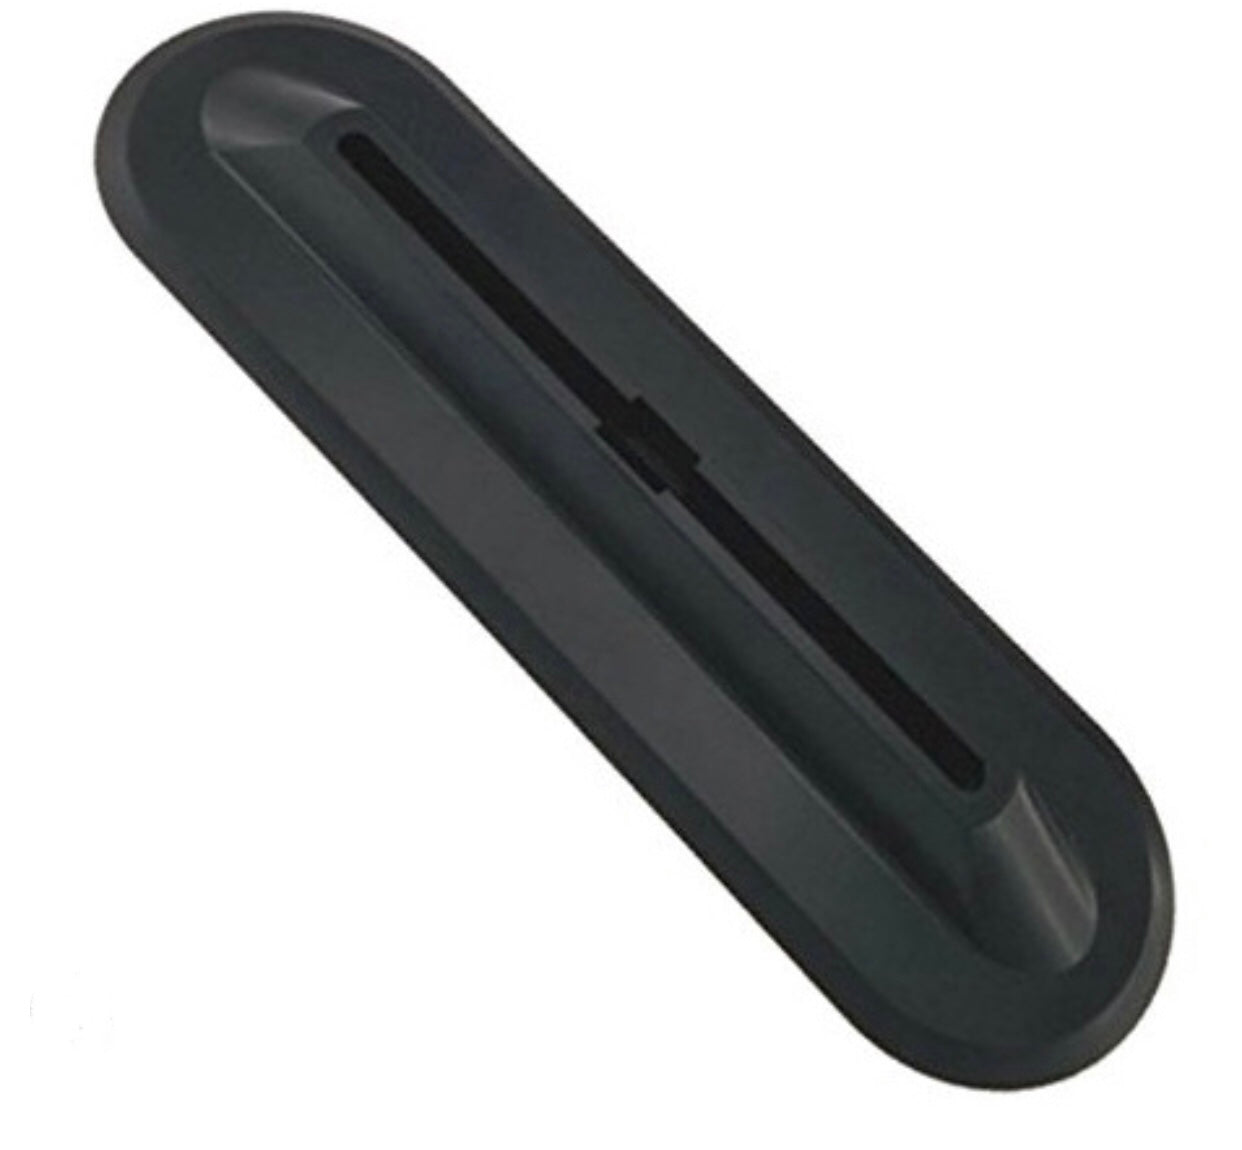 Replacement fin box for inflatable (SUP) paddle board